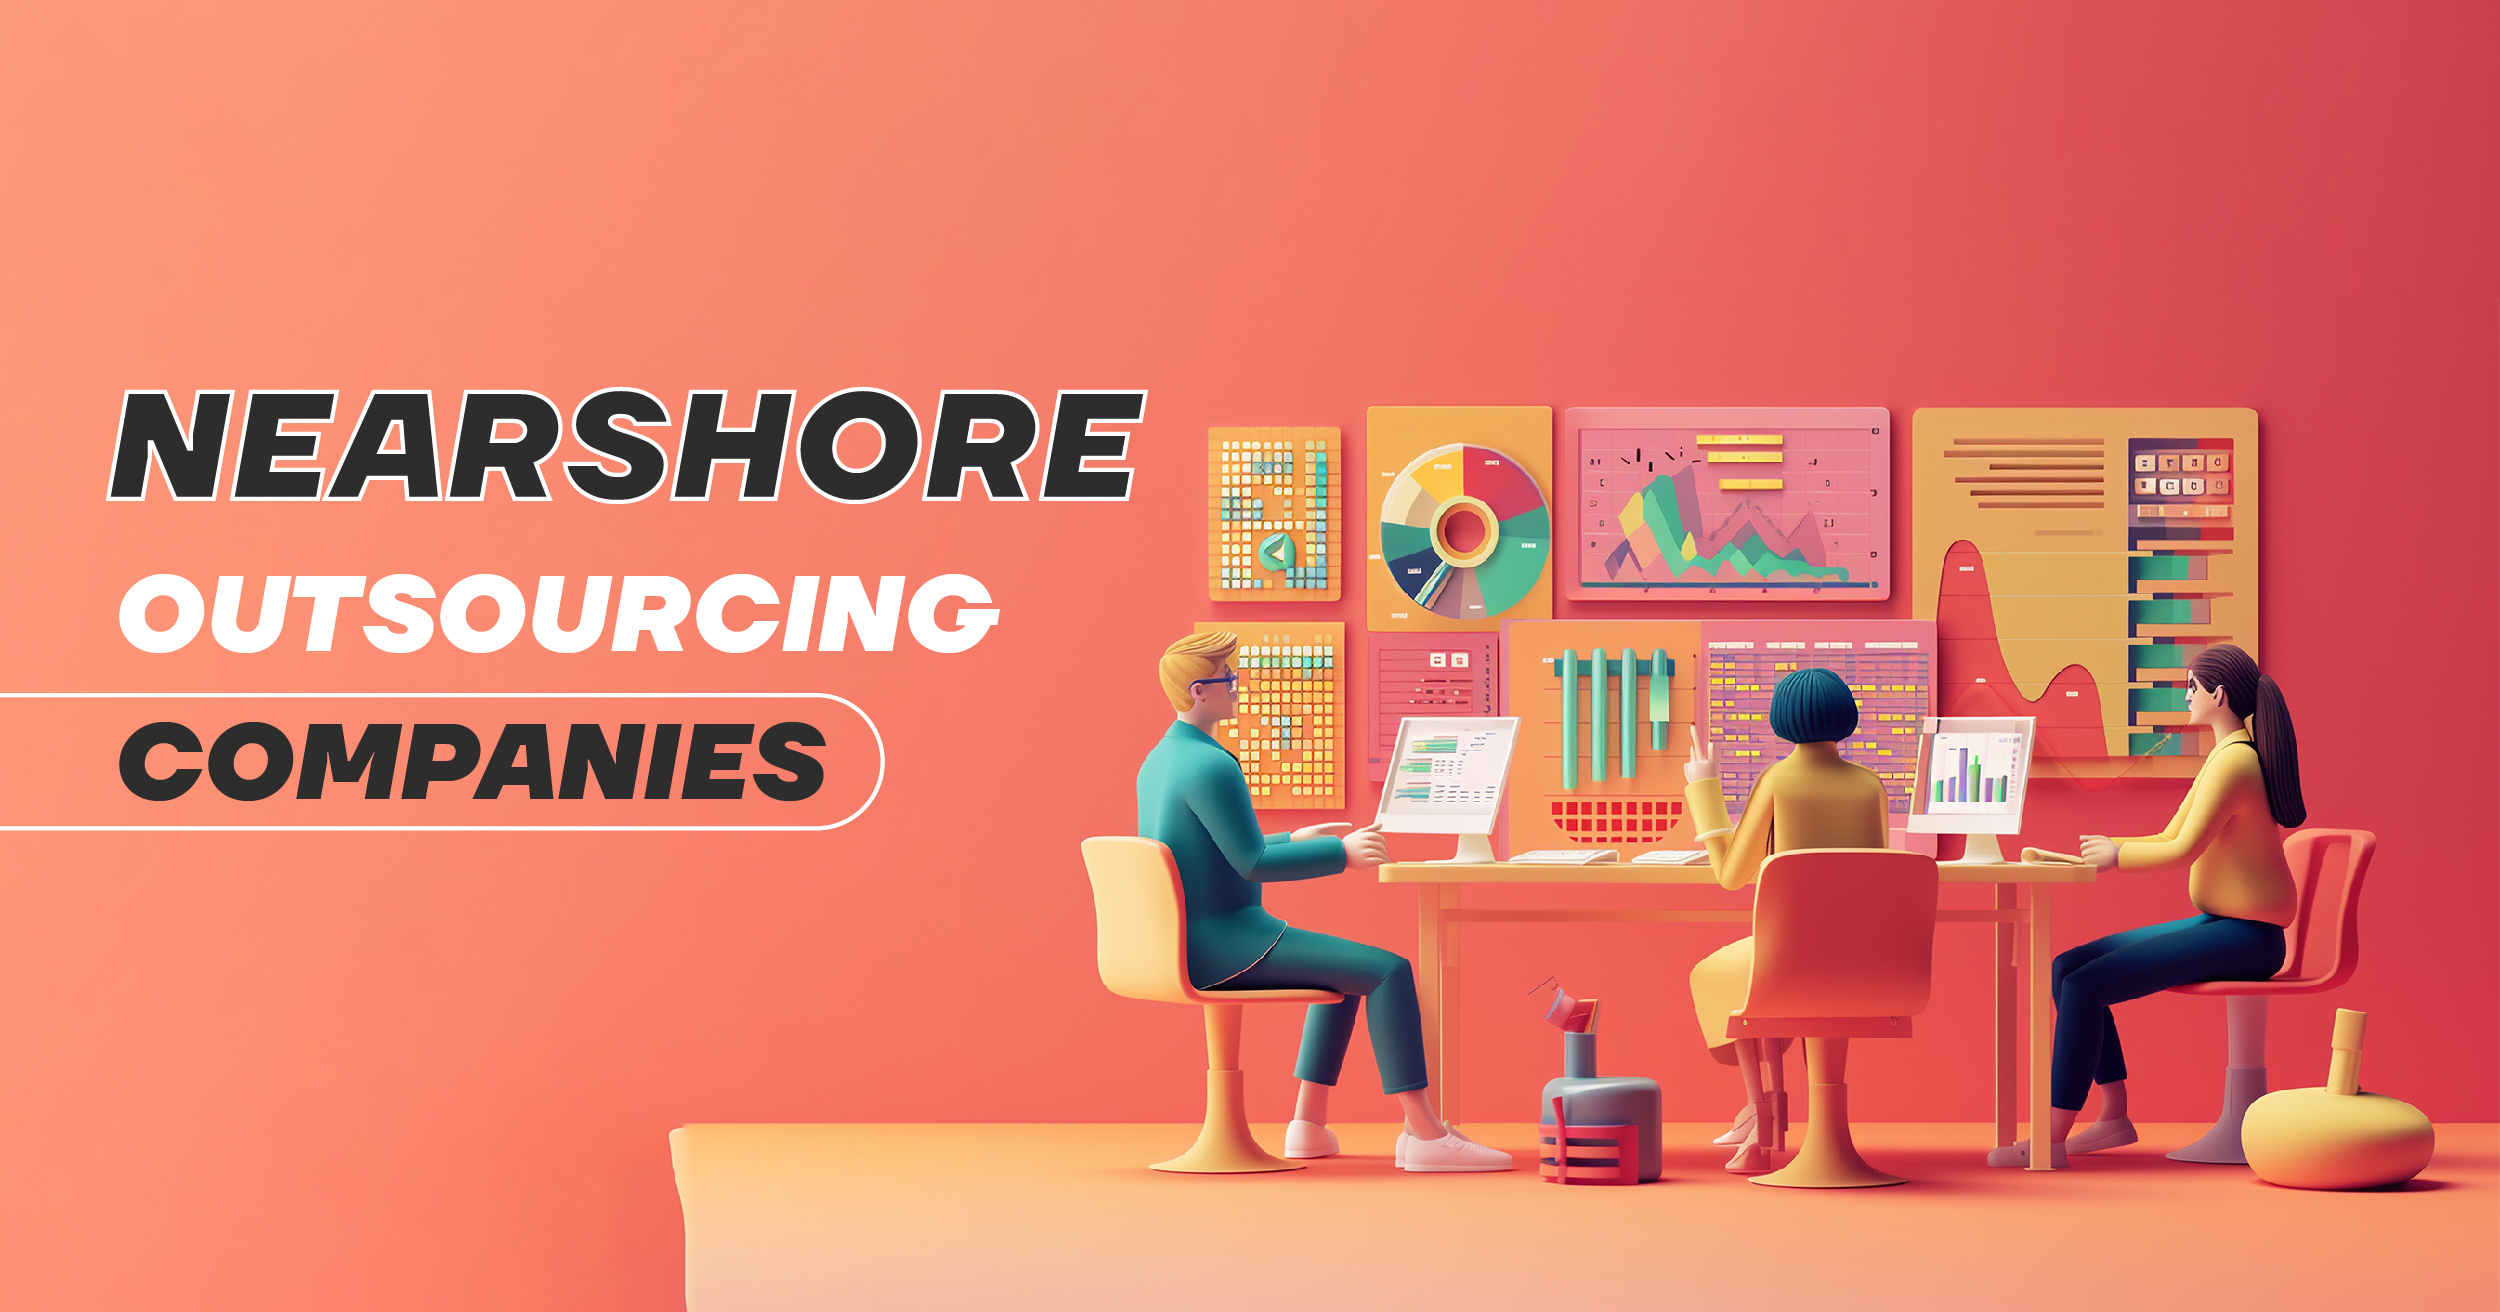 10 Best Nearshore Outsourcing Companies